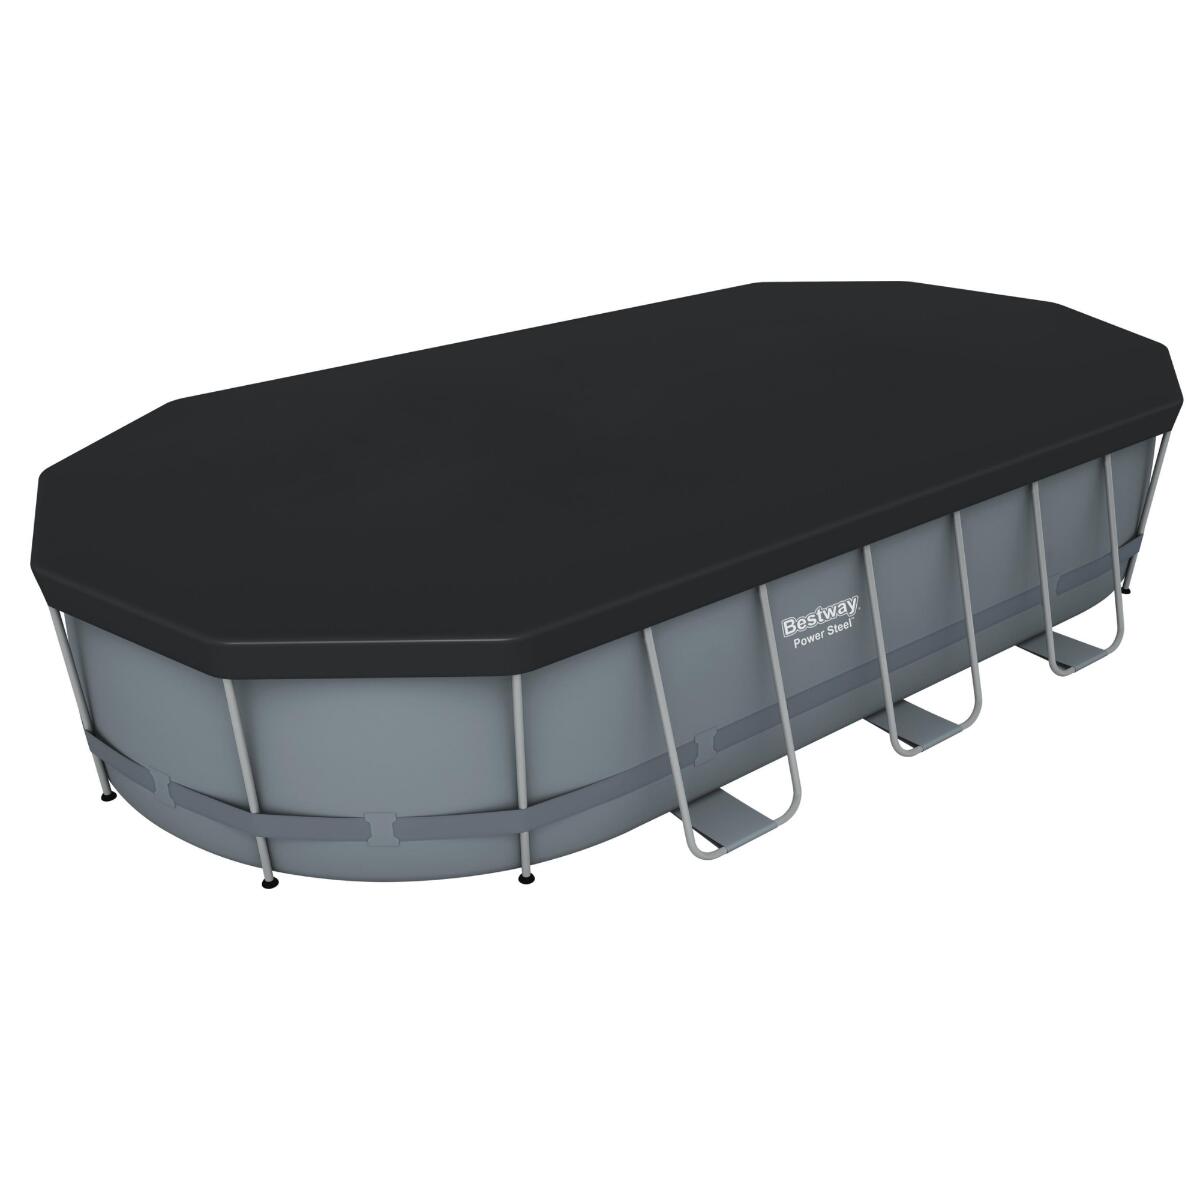 Bestway 18ft x 9ft x 48" Oval Power Steel Above Ground Swimming Pool 5/6